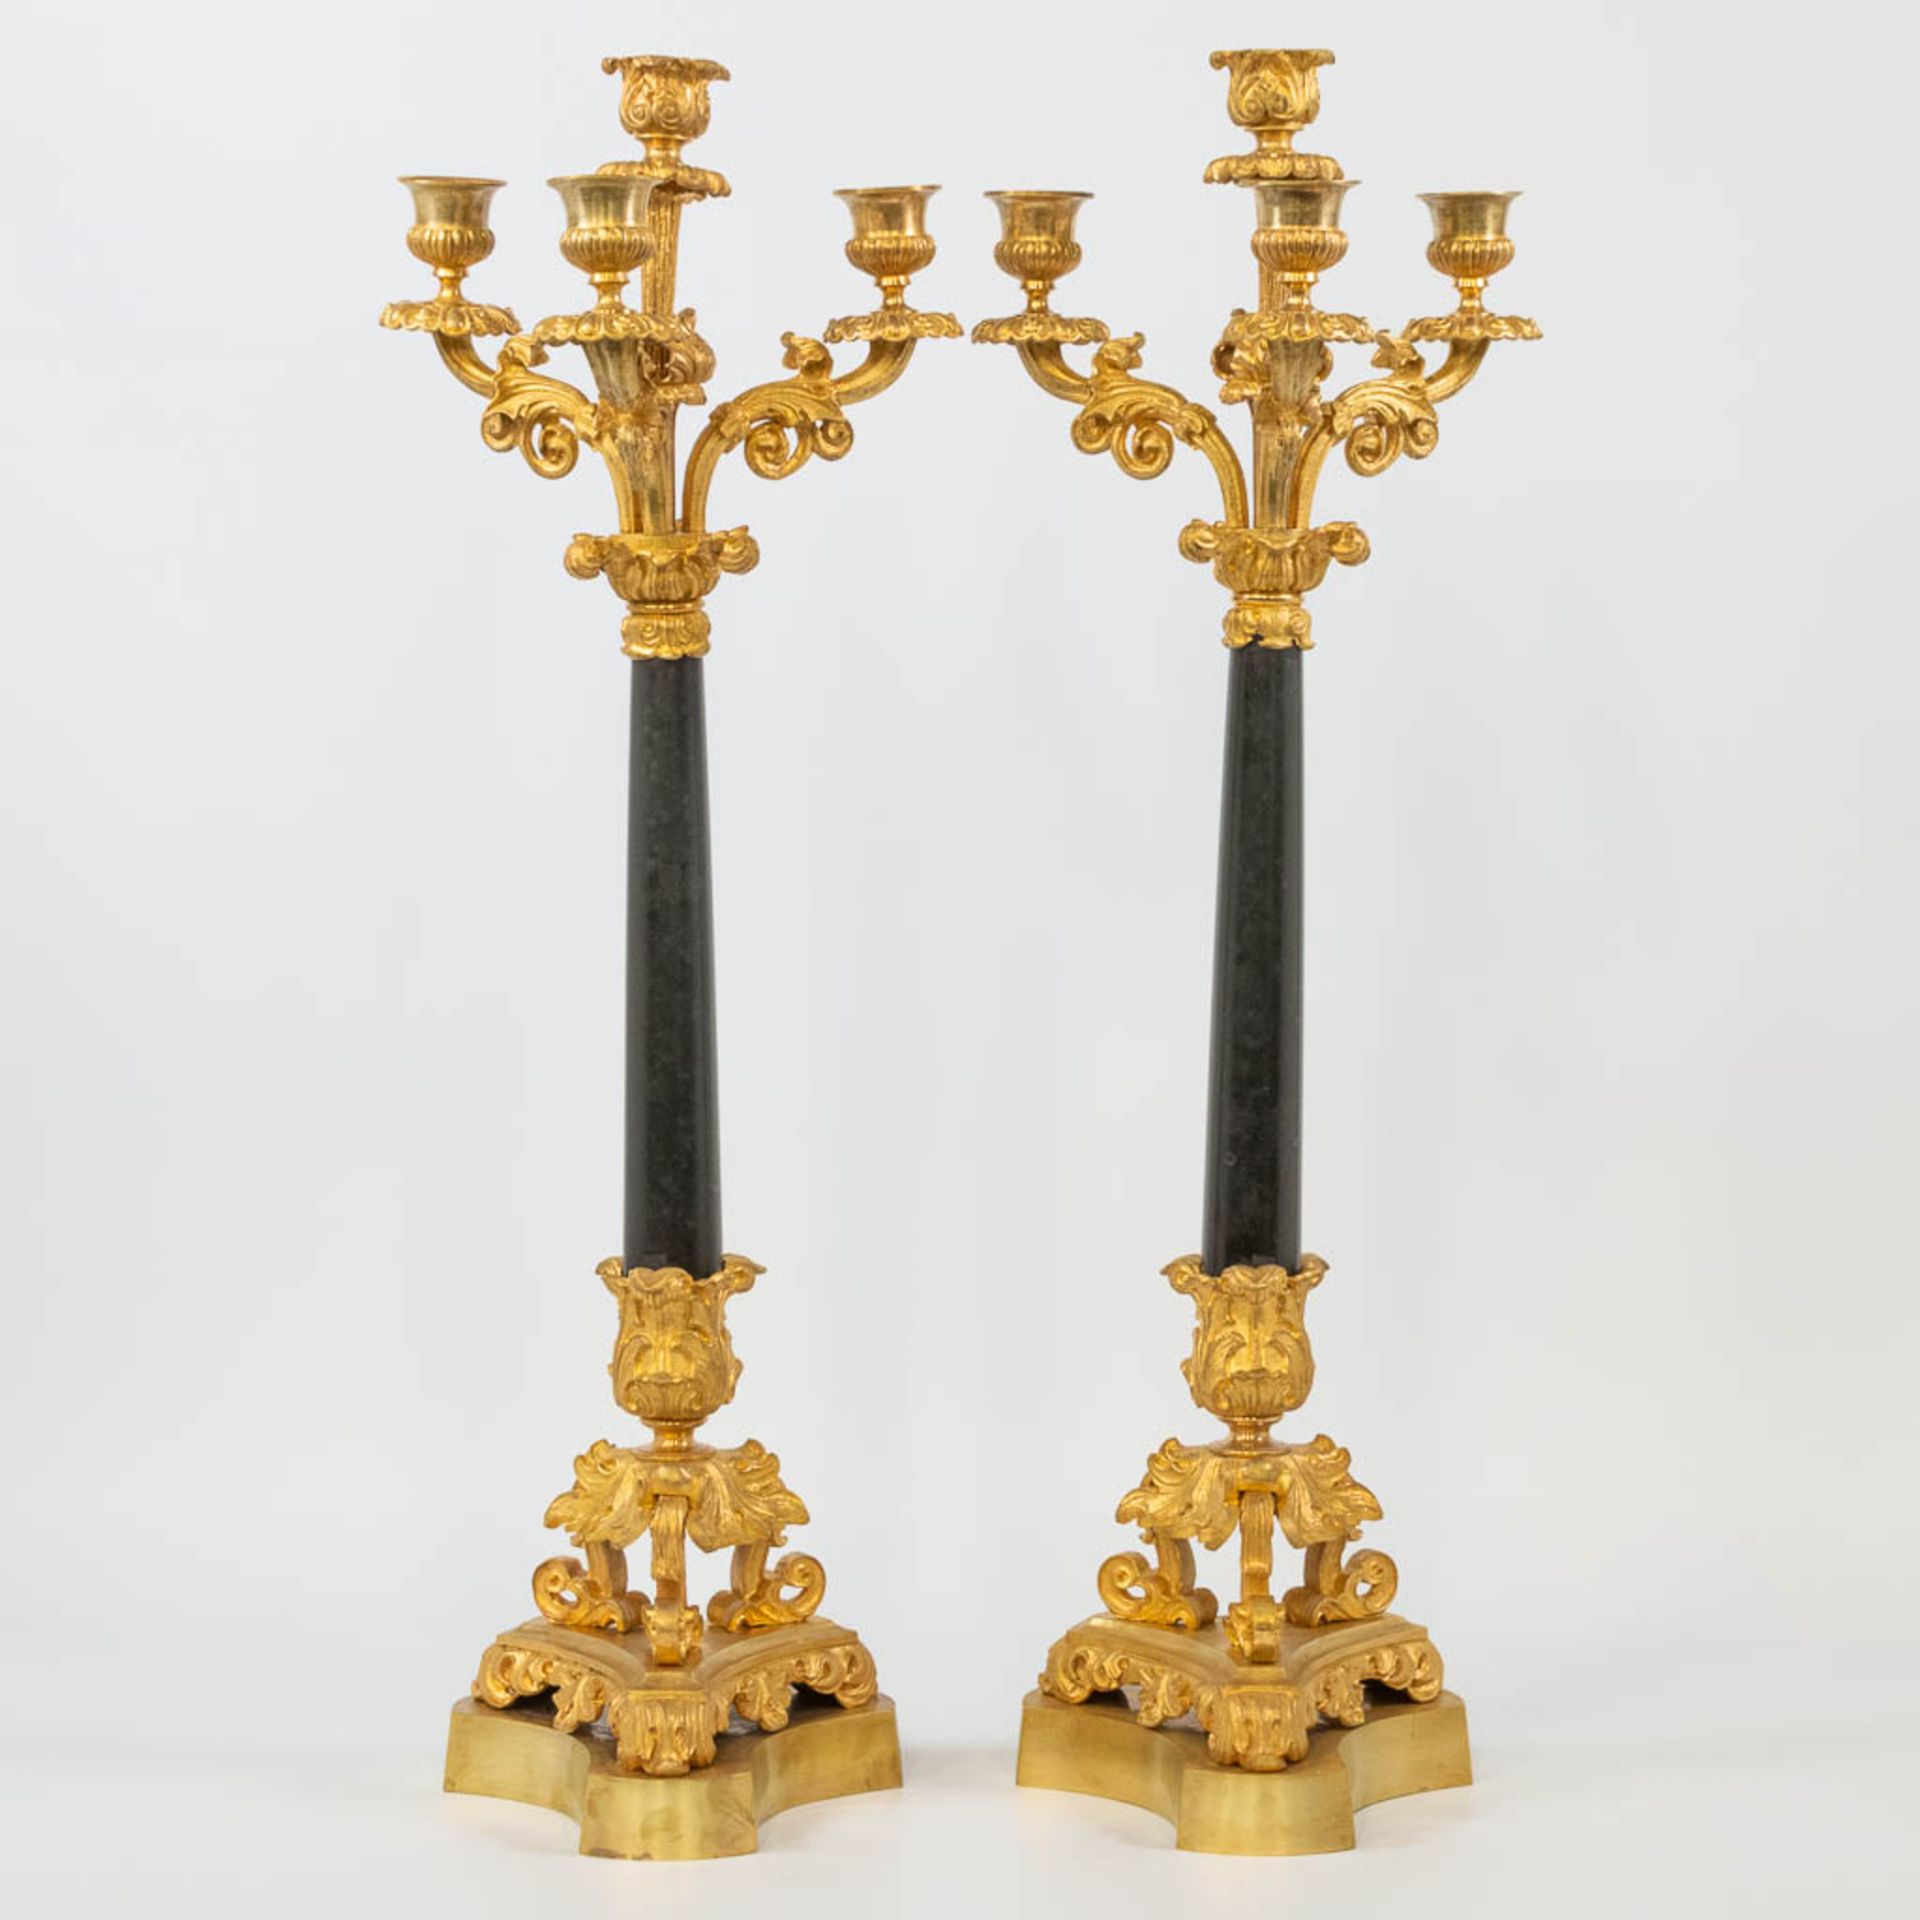 A pair of candelabra, empire style, made of gilt bronze. 19th century. (60 x 19 cm)